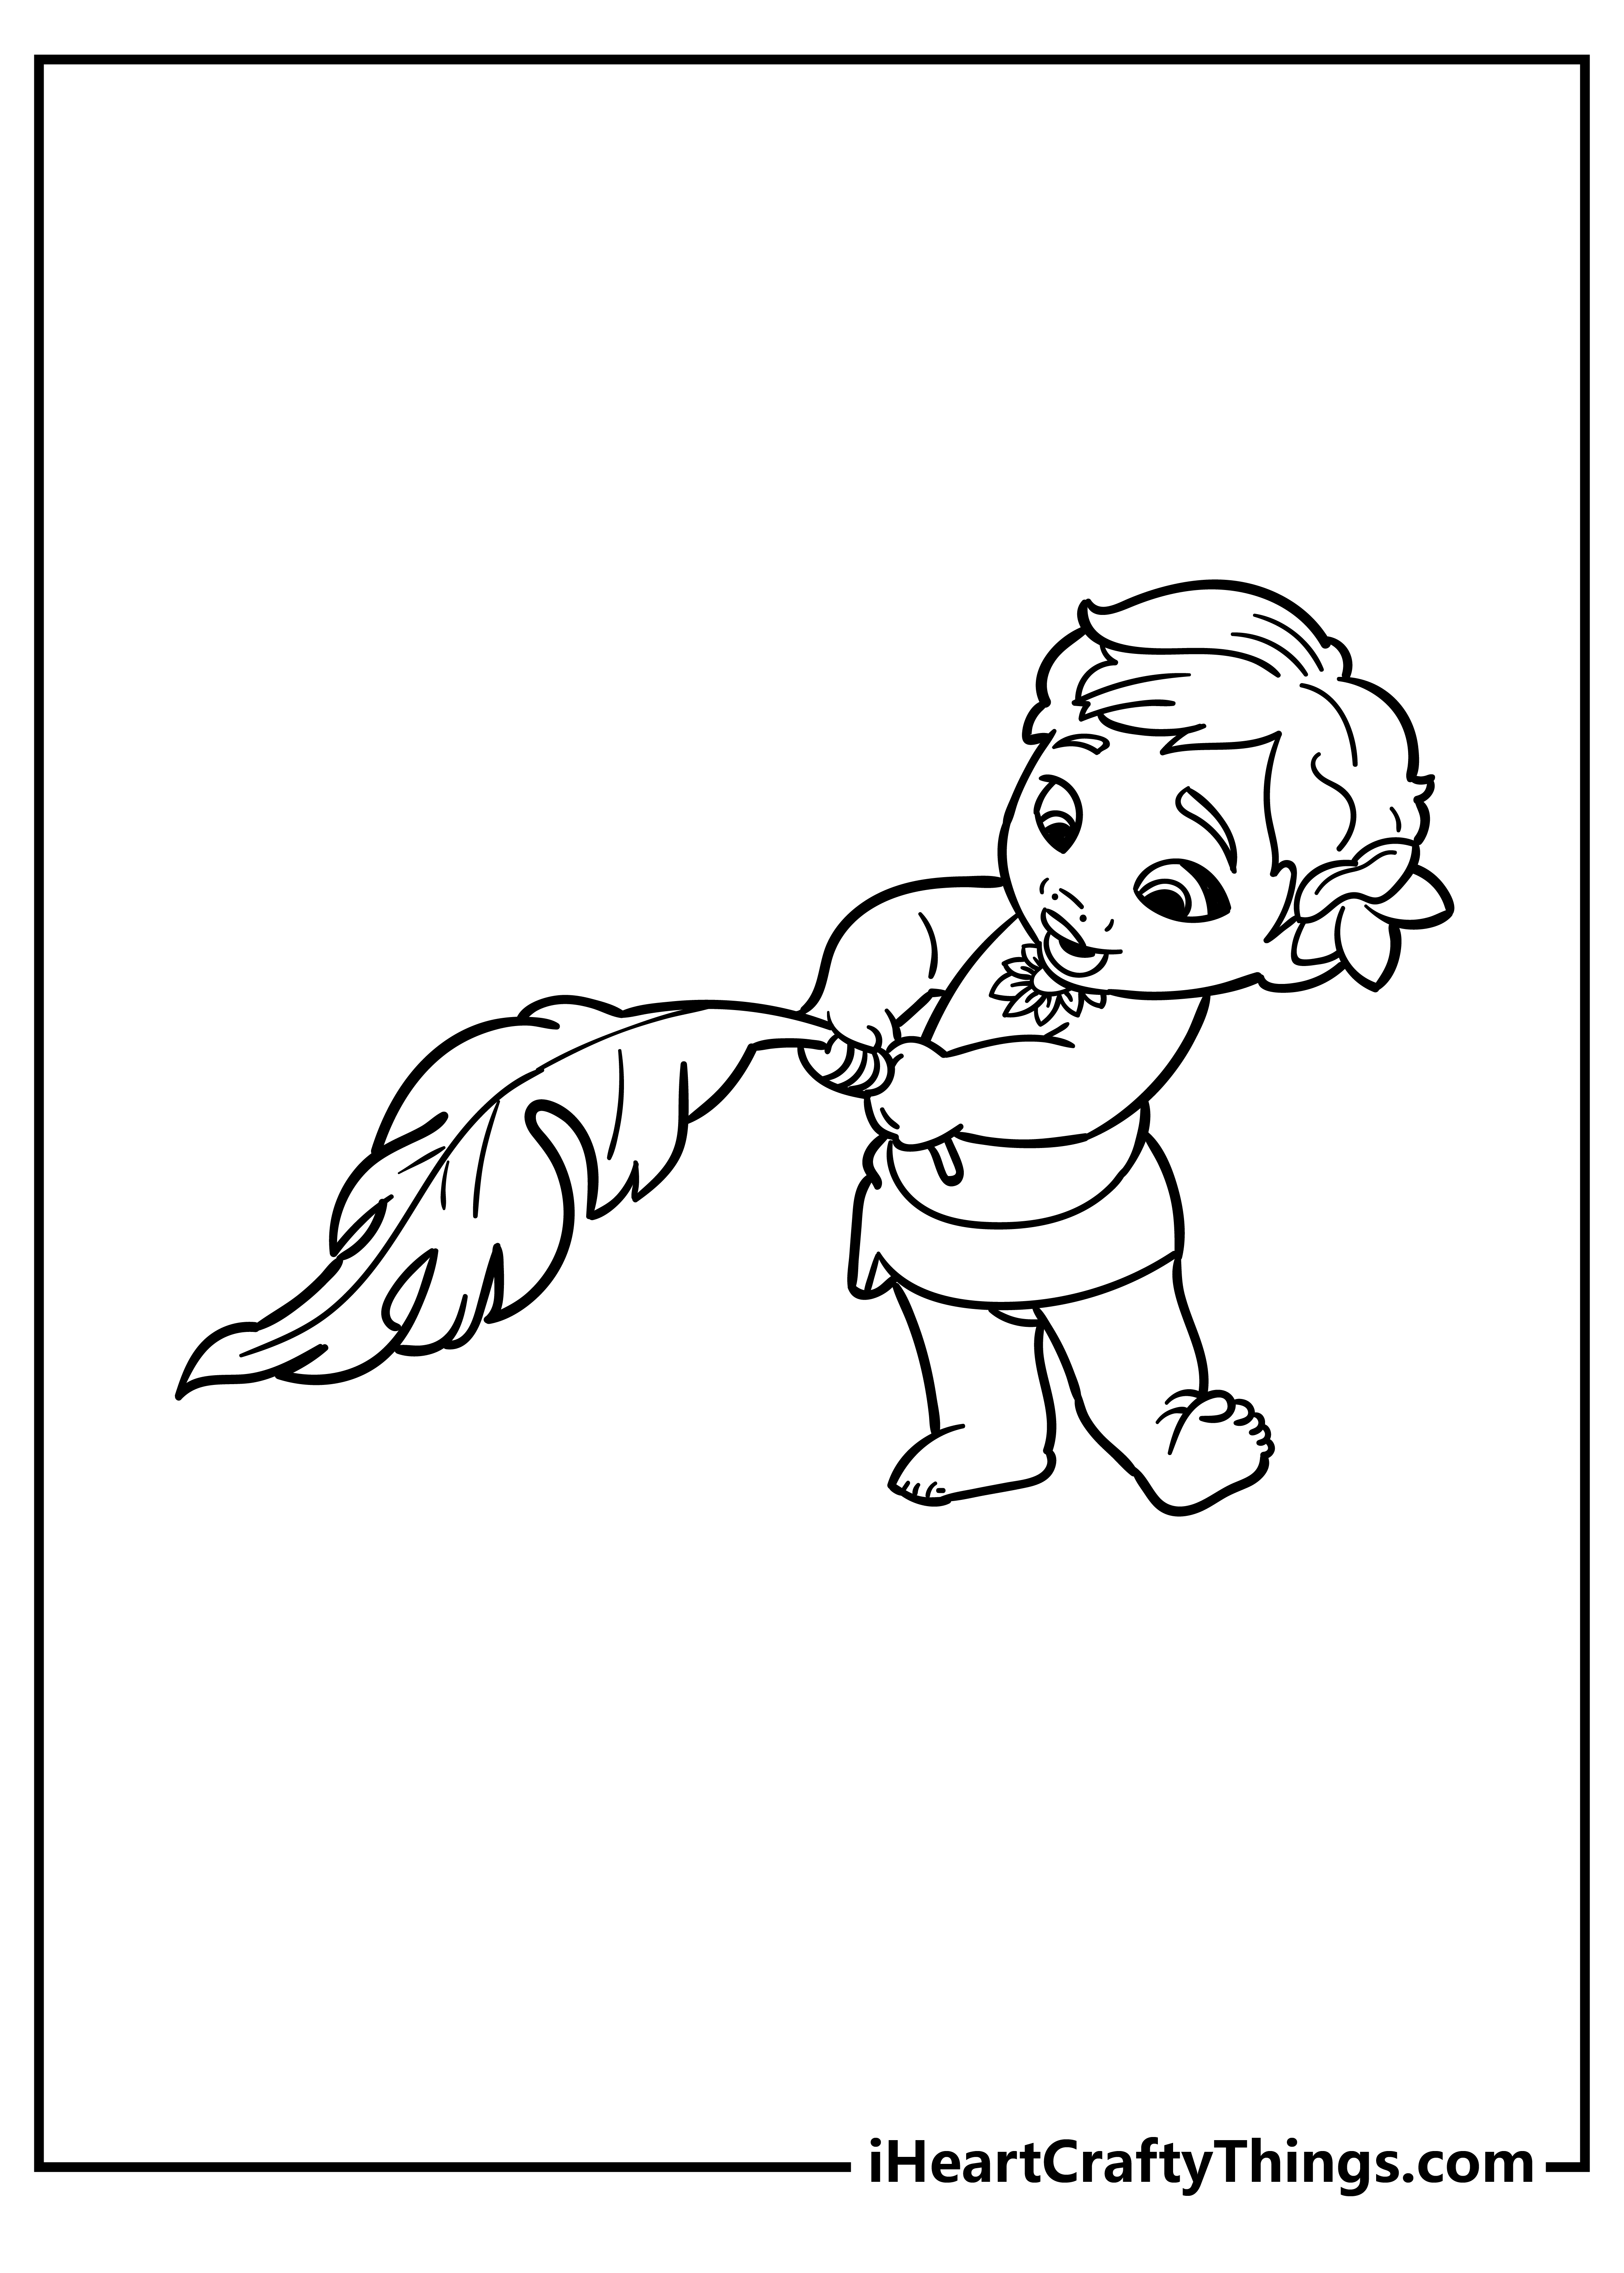 Moana Coloring Pages for kids free download